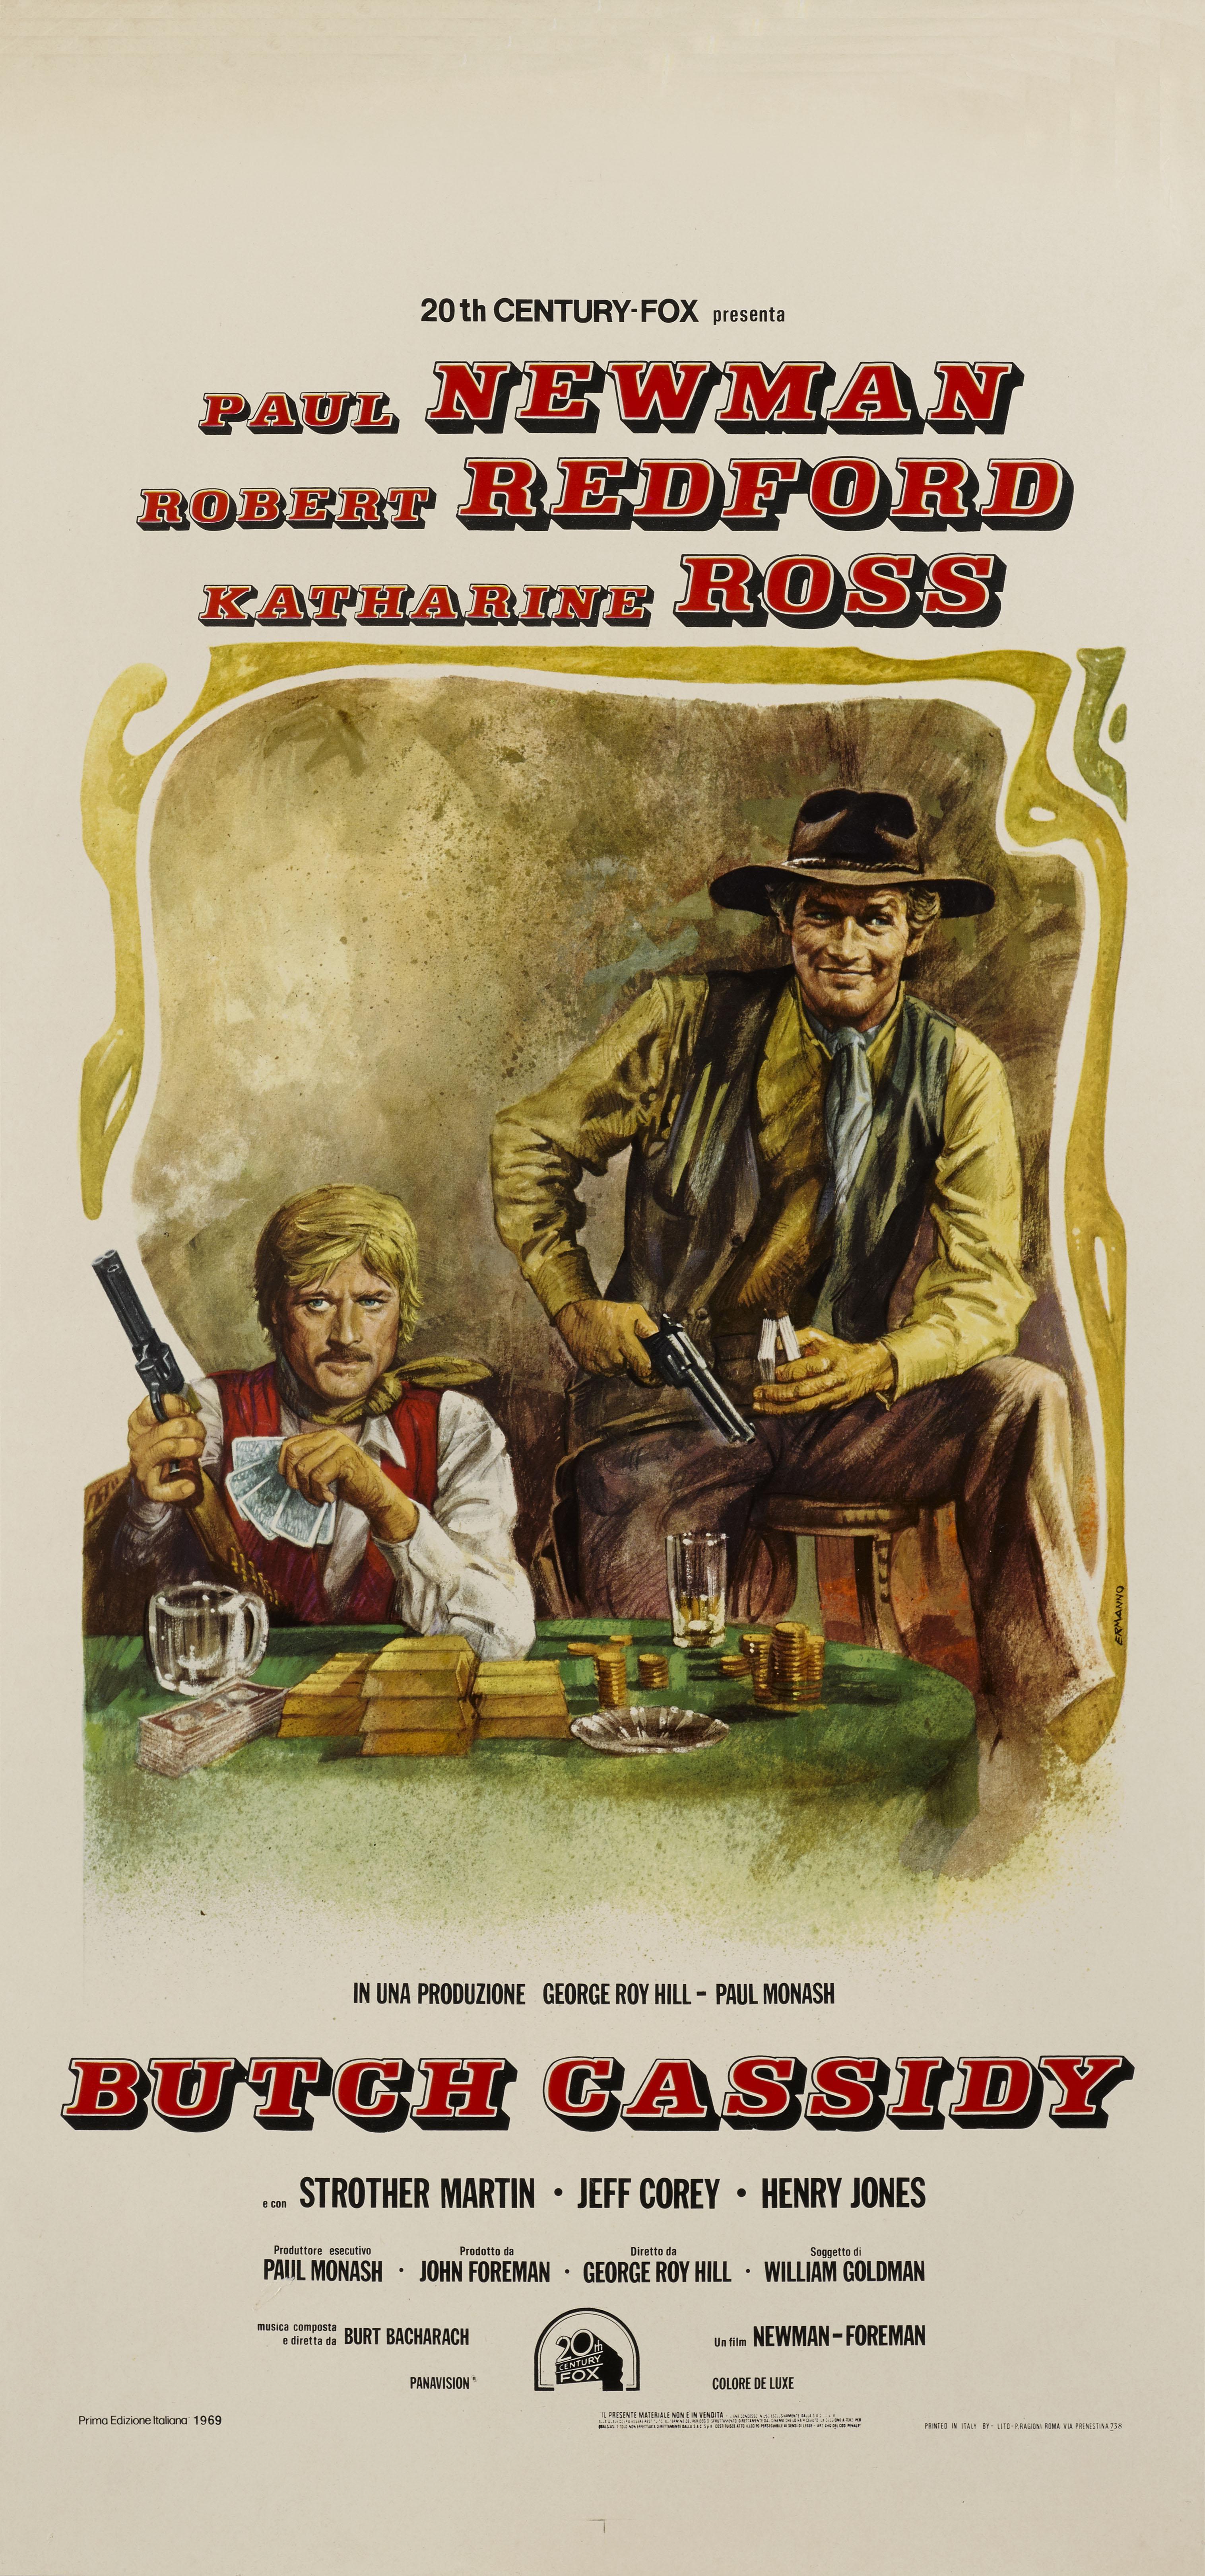 Original Italian film poster for the 1969 Classic western staring Paul Newman, Robert Redford, Katherine Ross. This size poster would have been used outside the cinema in glass display case. This poster was designed by Pietro Ermanno Iaia (b.1933)